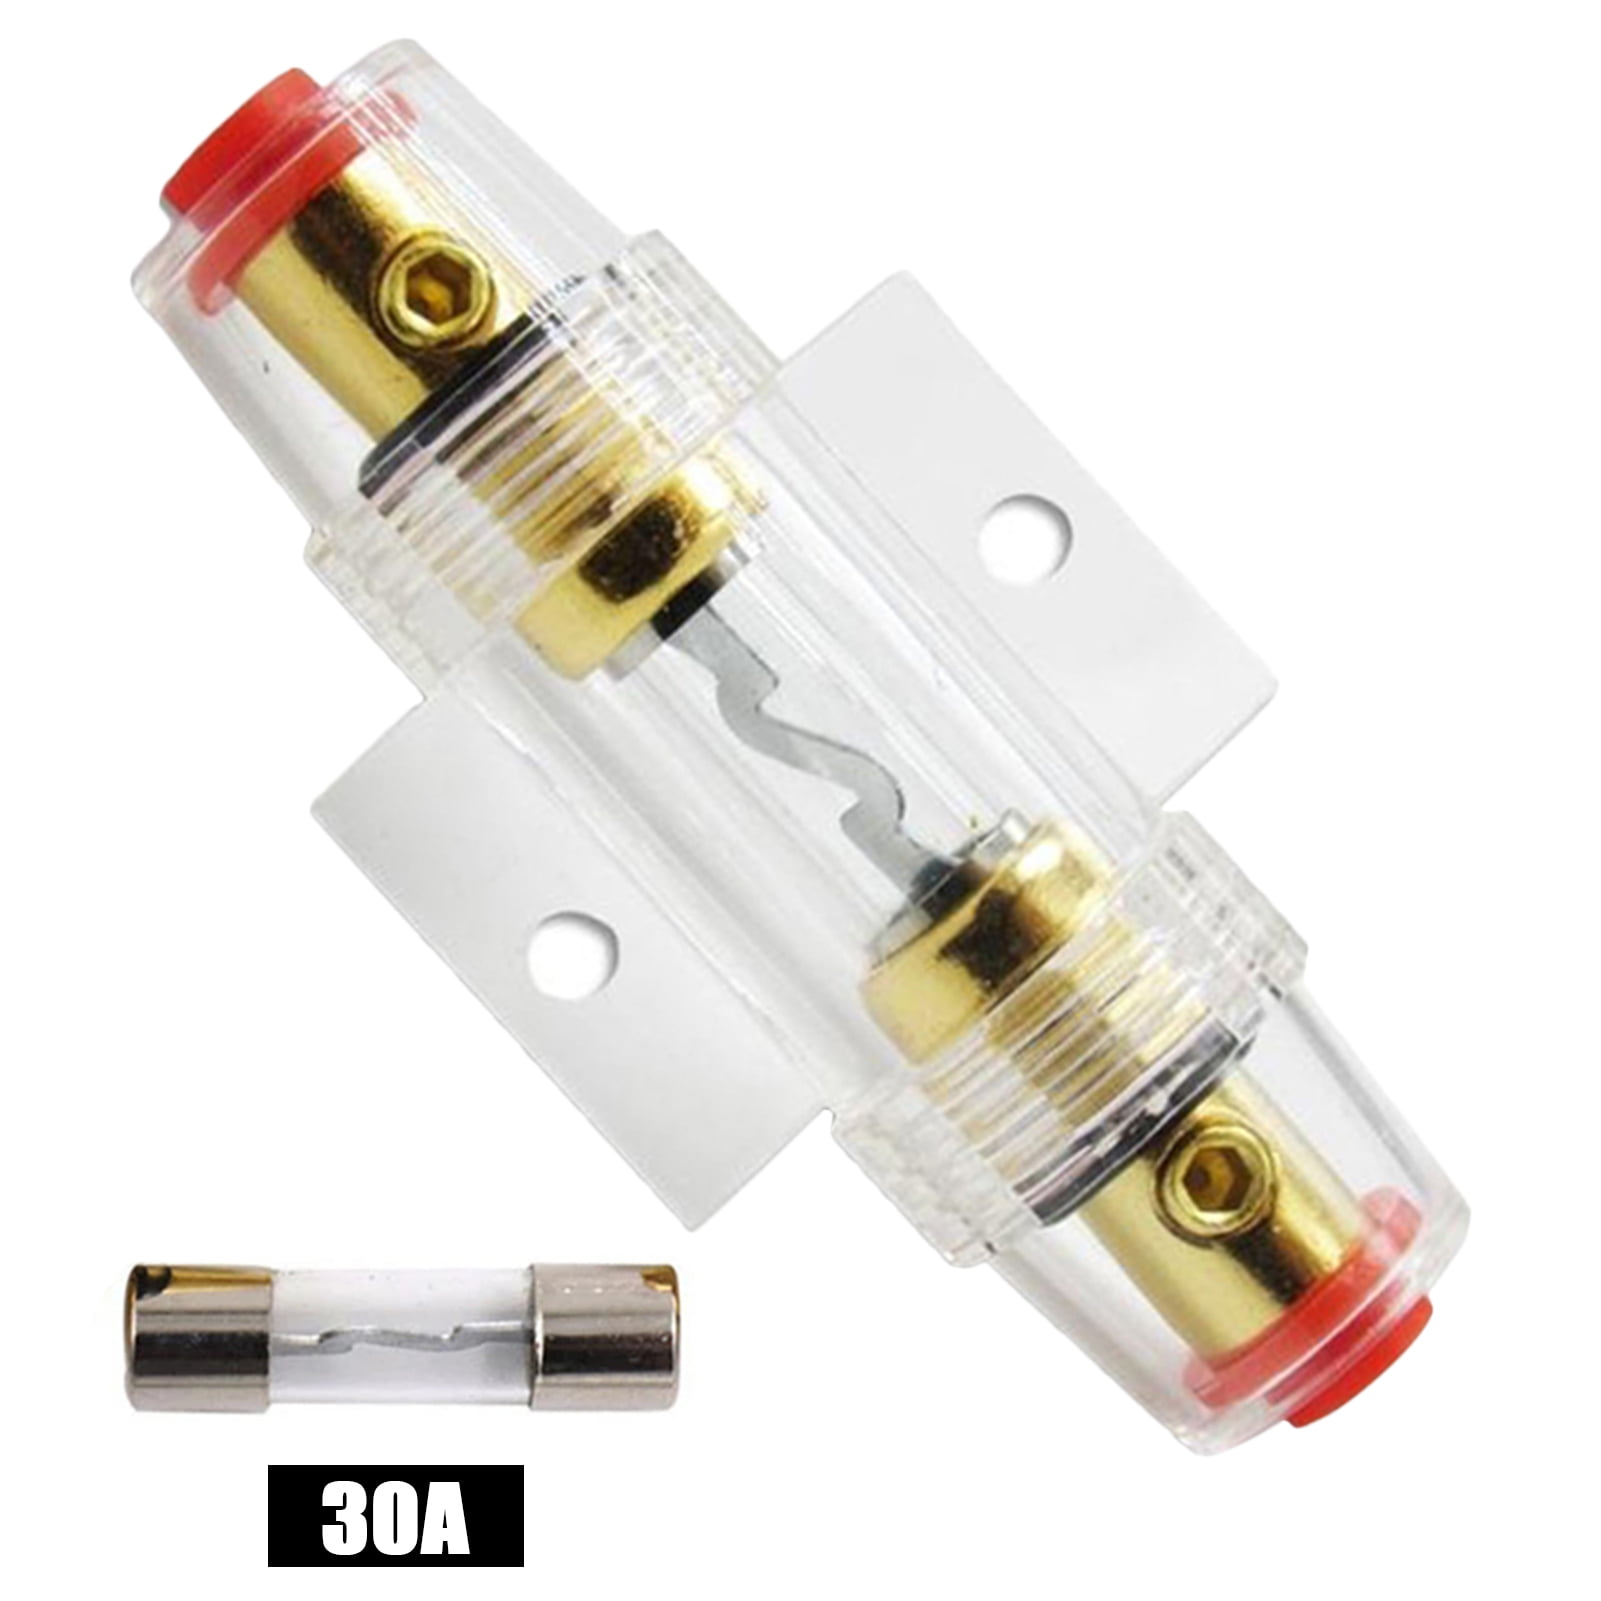 In Line Auto Glass Tube Fuse Holder For 30mm Fuses 8 amp Or 17 amp 